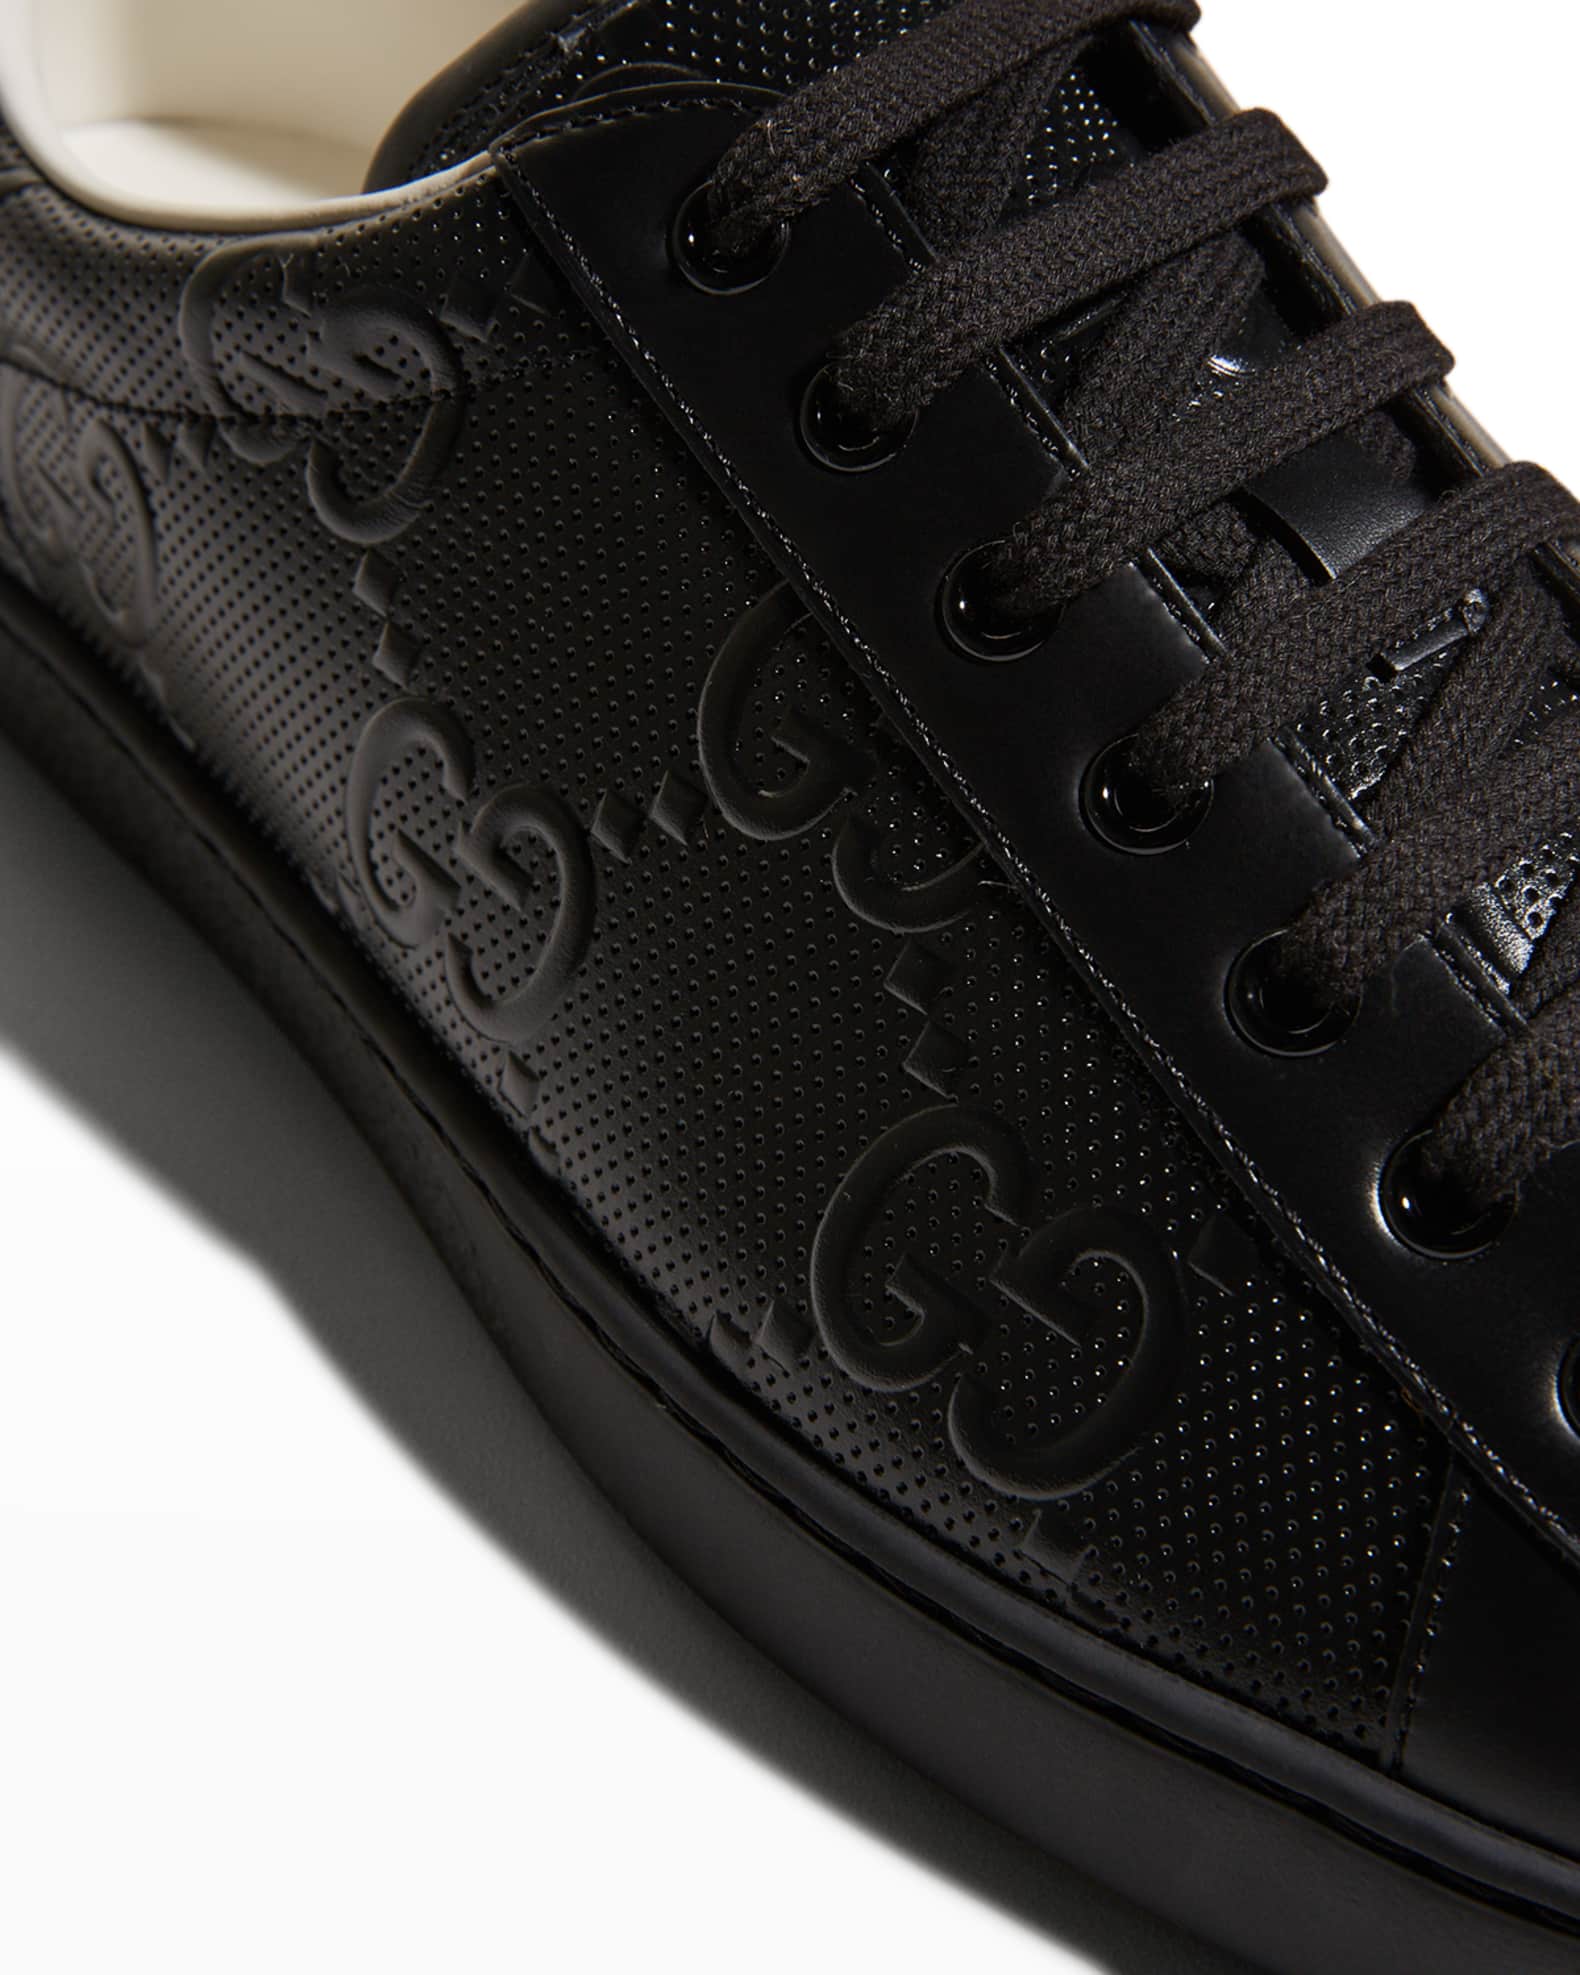 Gucci Men's Ace GG Embossed Low Top Sneakers